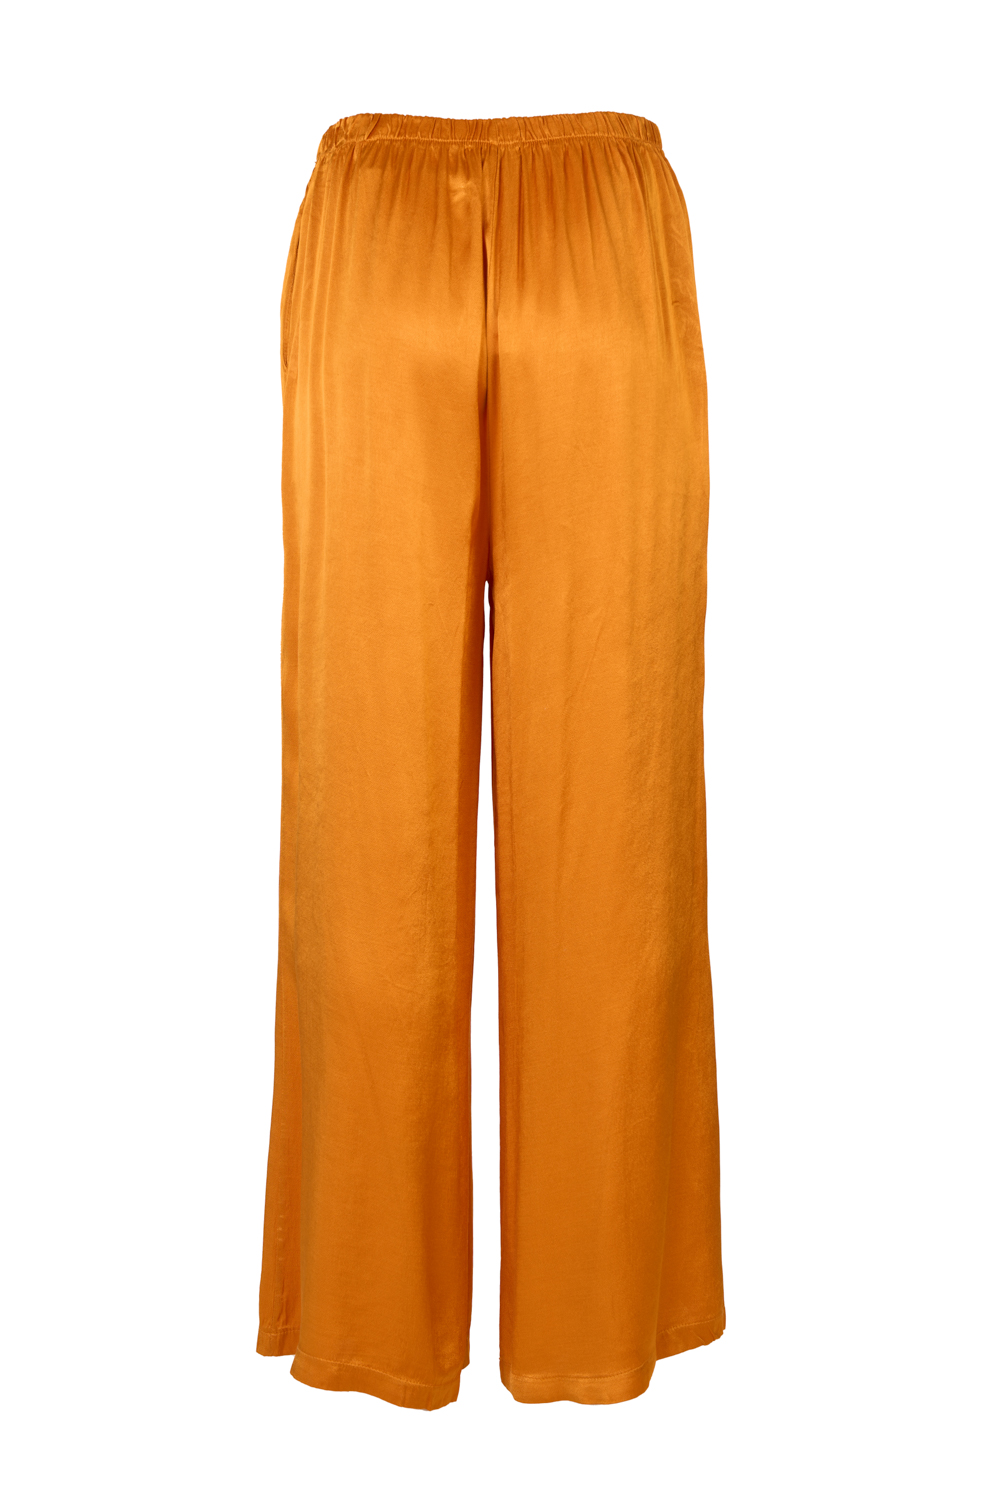 Wide Legged Silk-Viscose Trousers with Elasticated Waistband and Side Pockets (Free For Humanity)